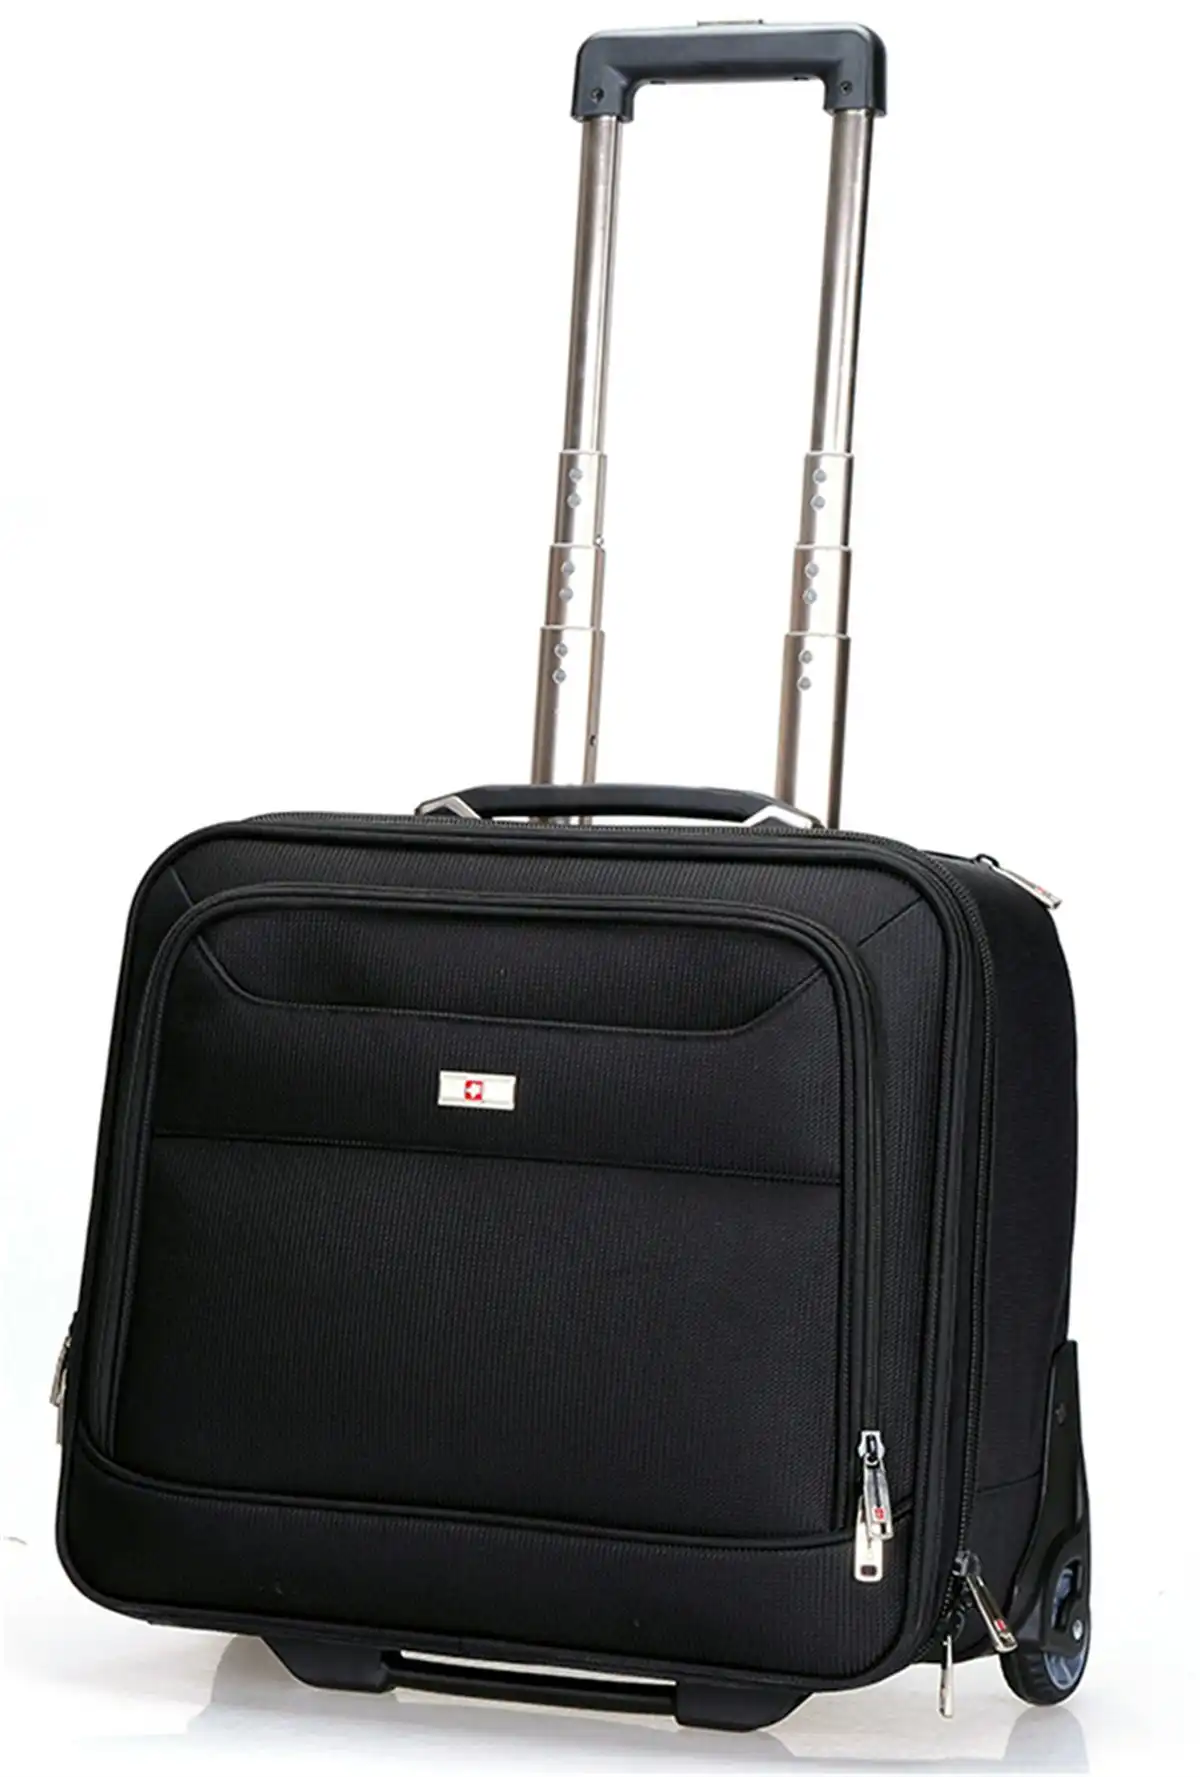 Swisswin Swiss SoftCase Luggage Briefcase Suitcase 15.6″Laptop & Tablet Rolling Tote Black